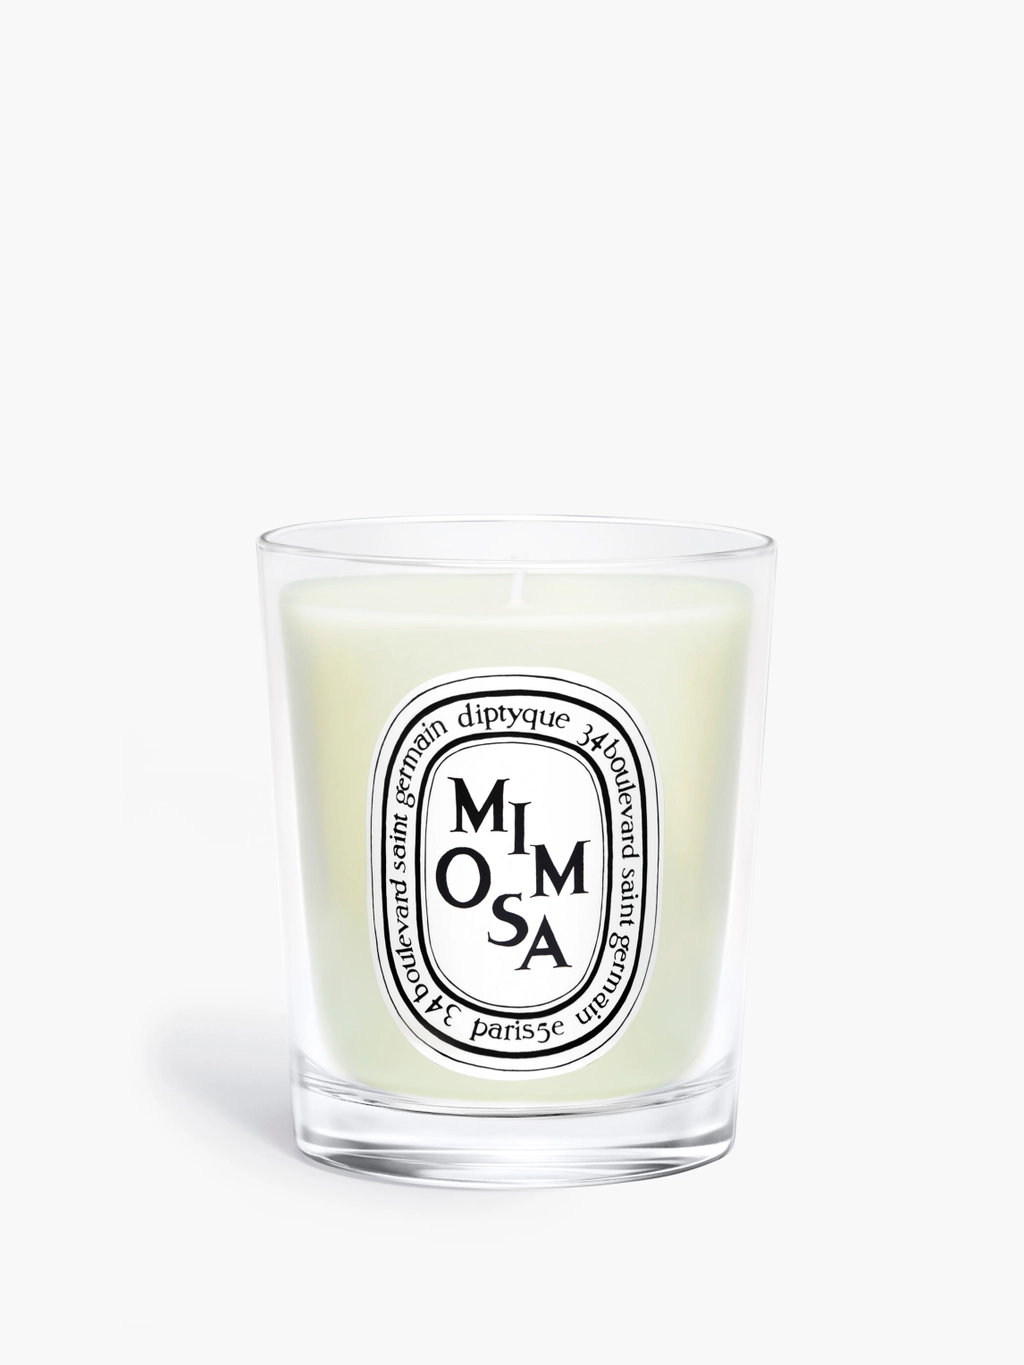 https://www.diptyqueparis.com/media/catalog/product/d/i/diptyque-mimosa-small-candle-70g-mi70v-1.jpg?quality=100&bg-color=255,255,255&fit=bounds&height=&width=&format=webp&width=1024&quality=90